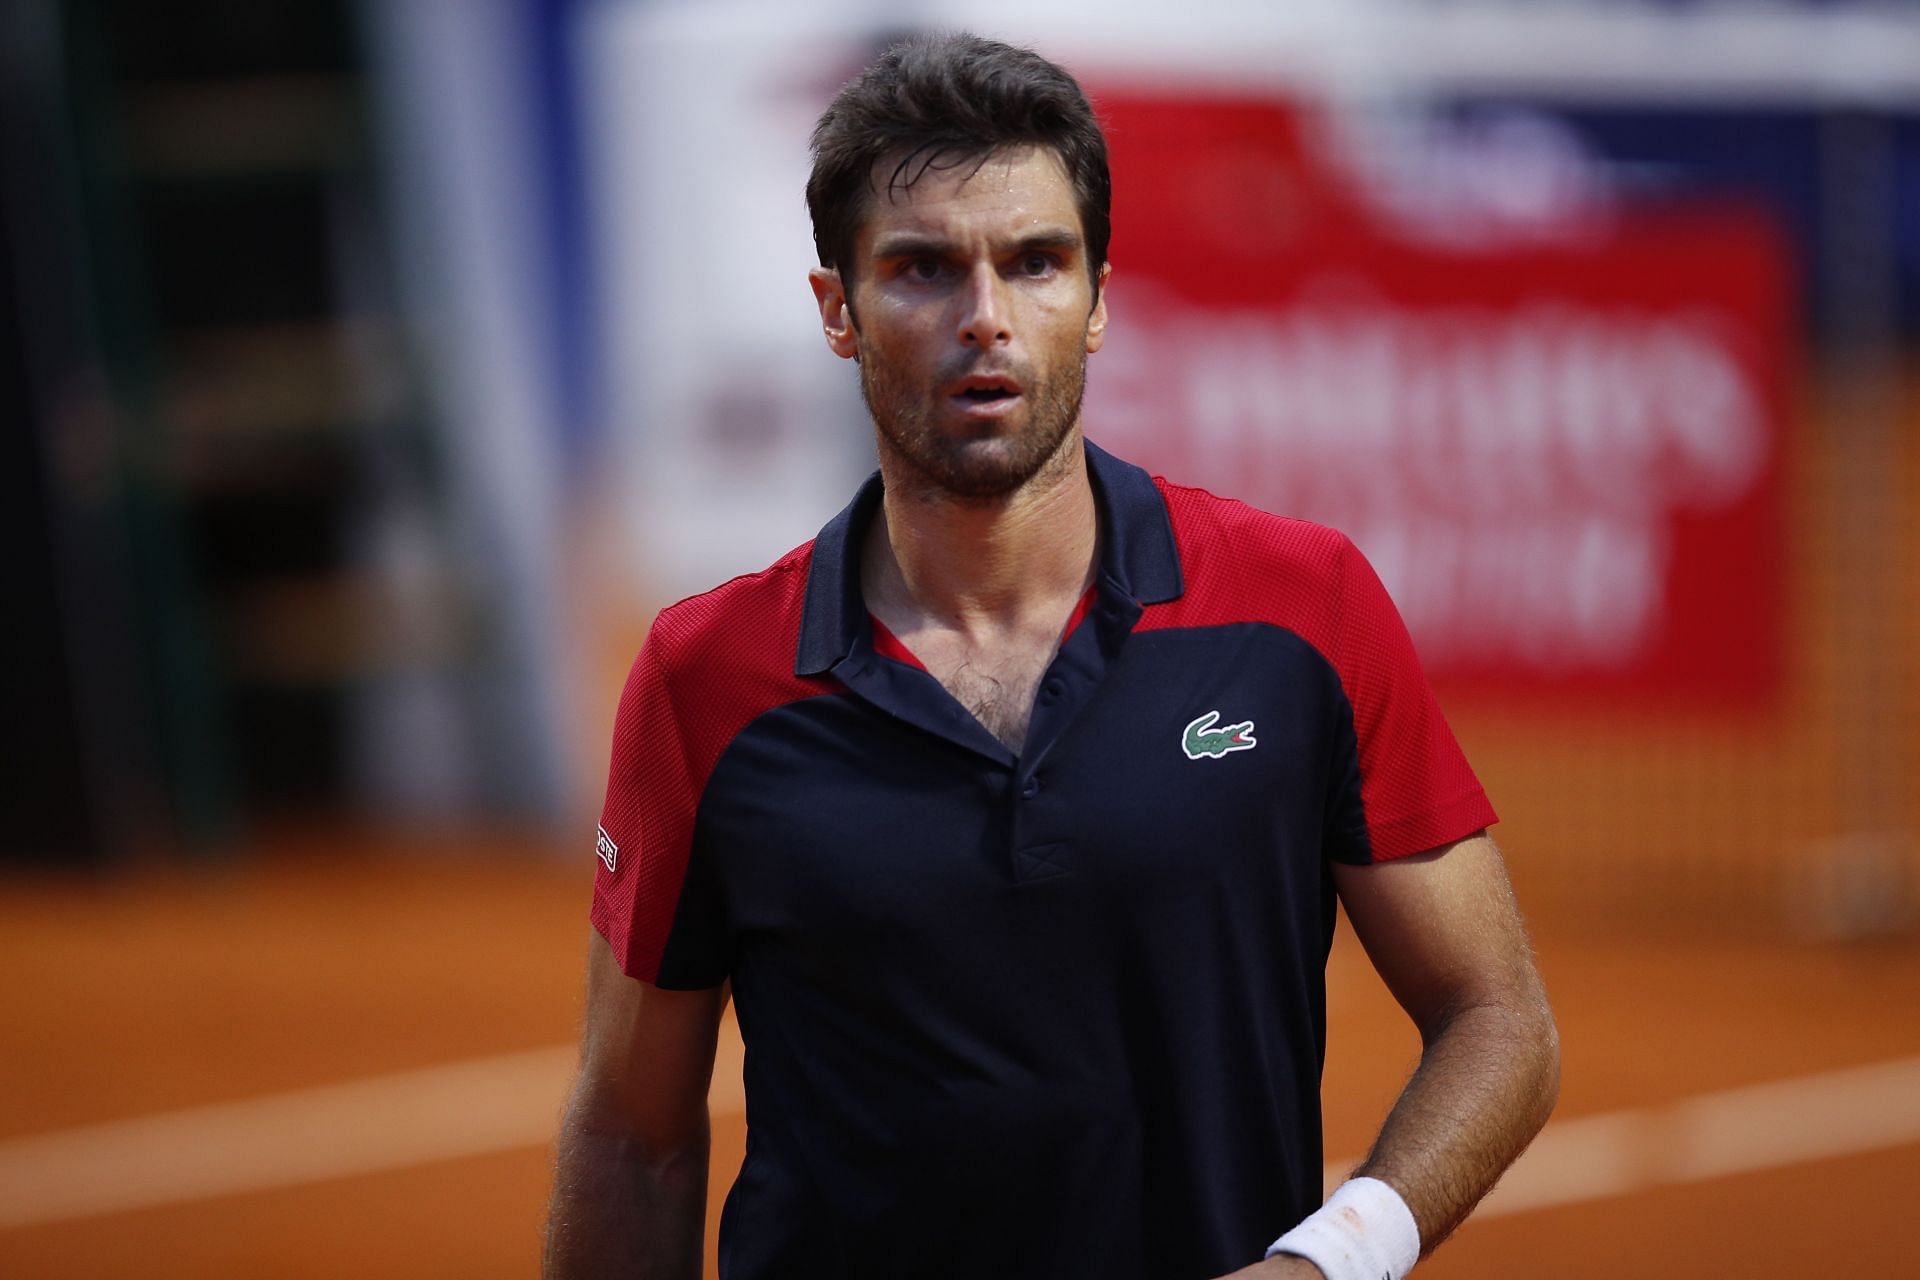 Pablo Andujar at the 2021 Barcelona Open.